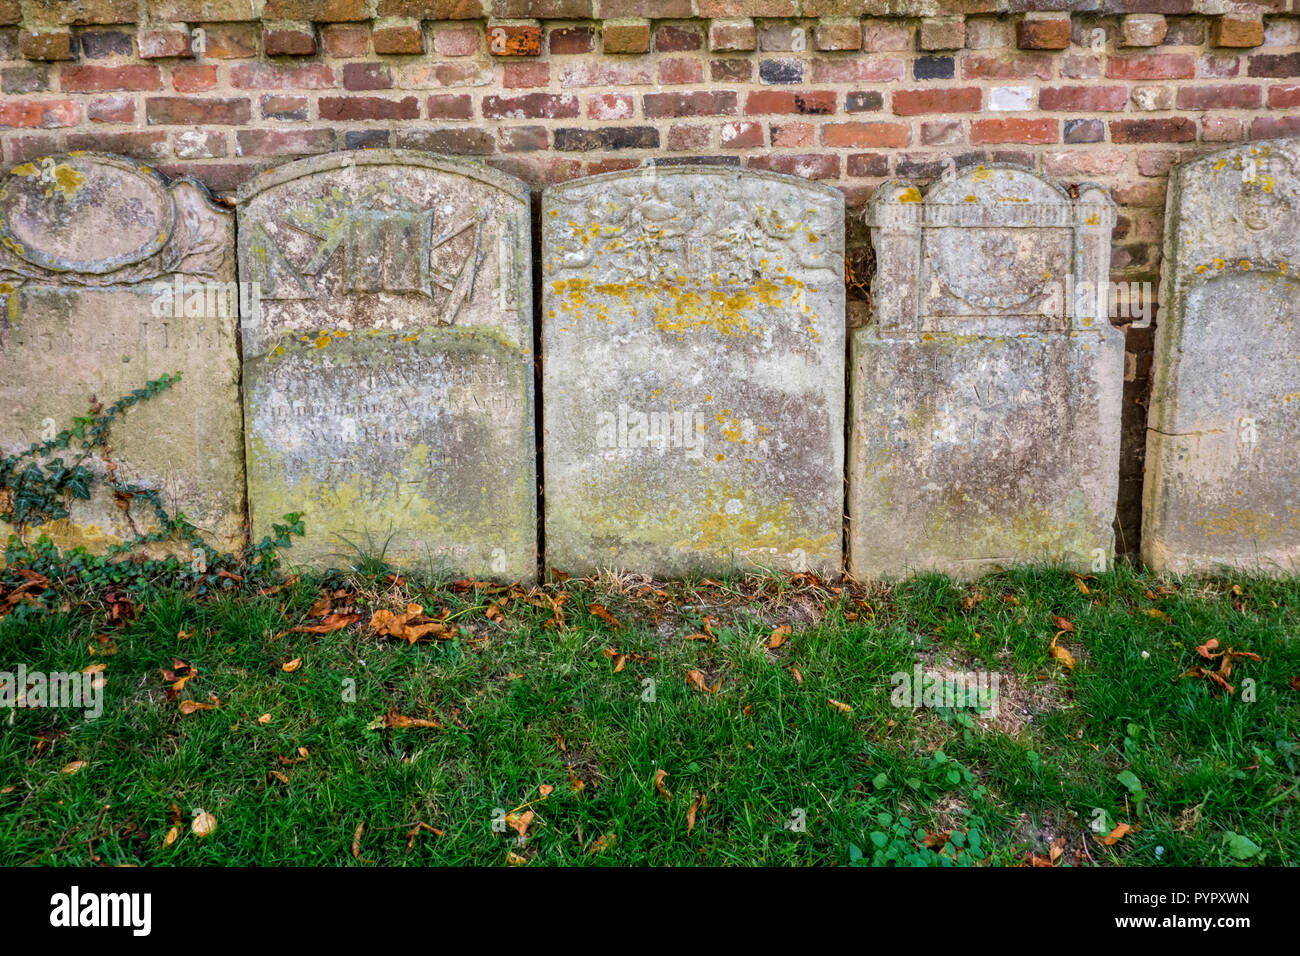 Grave stones lined up against a brick wall St Mary the Virgin parish church Saffron Walden, historic market town in Uttlesford, Essex, UK Stock Photo